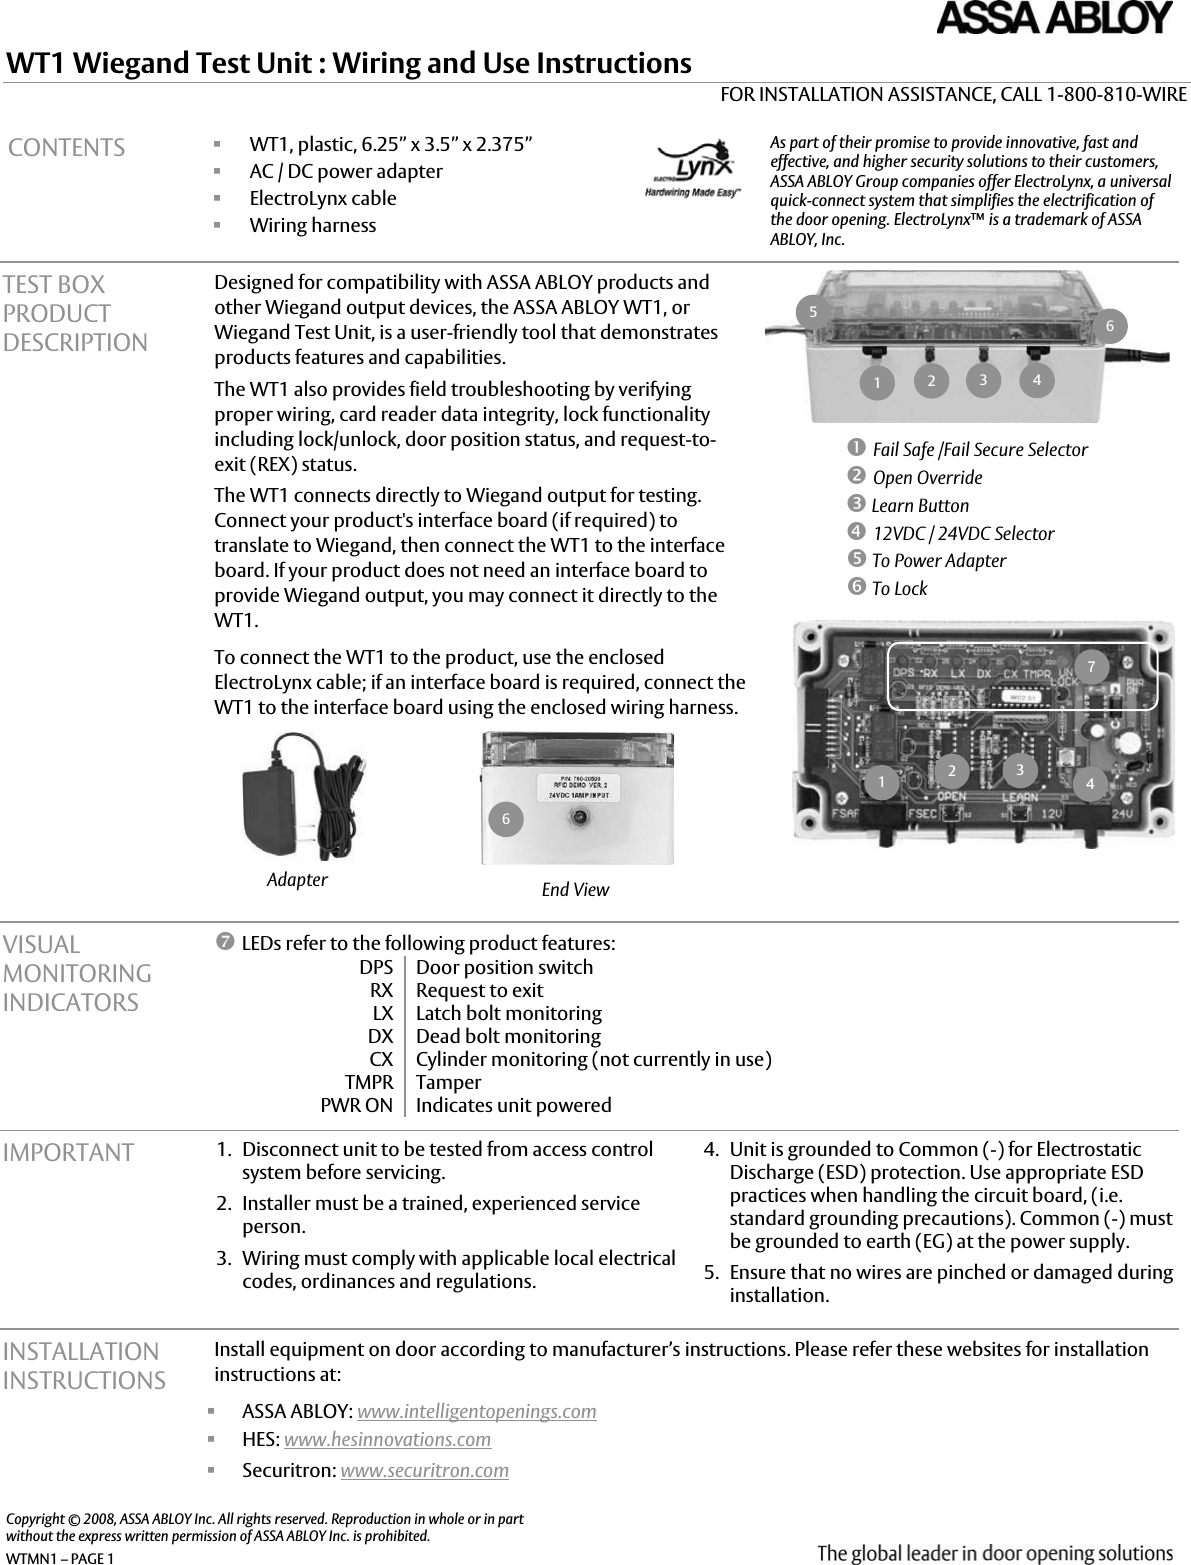 Page 1 of 4 - Securitron - WTMN1A_24SEP08 WT1 Wiring And Use Instructions I 500-63020 A